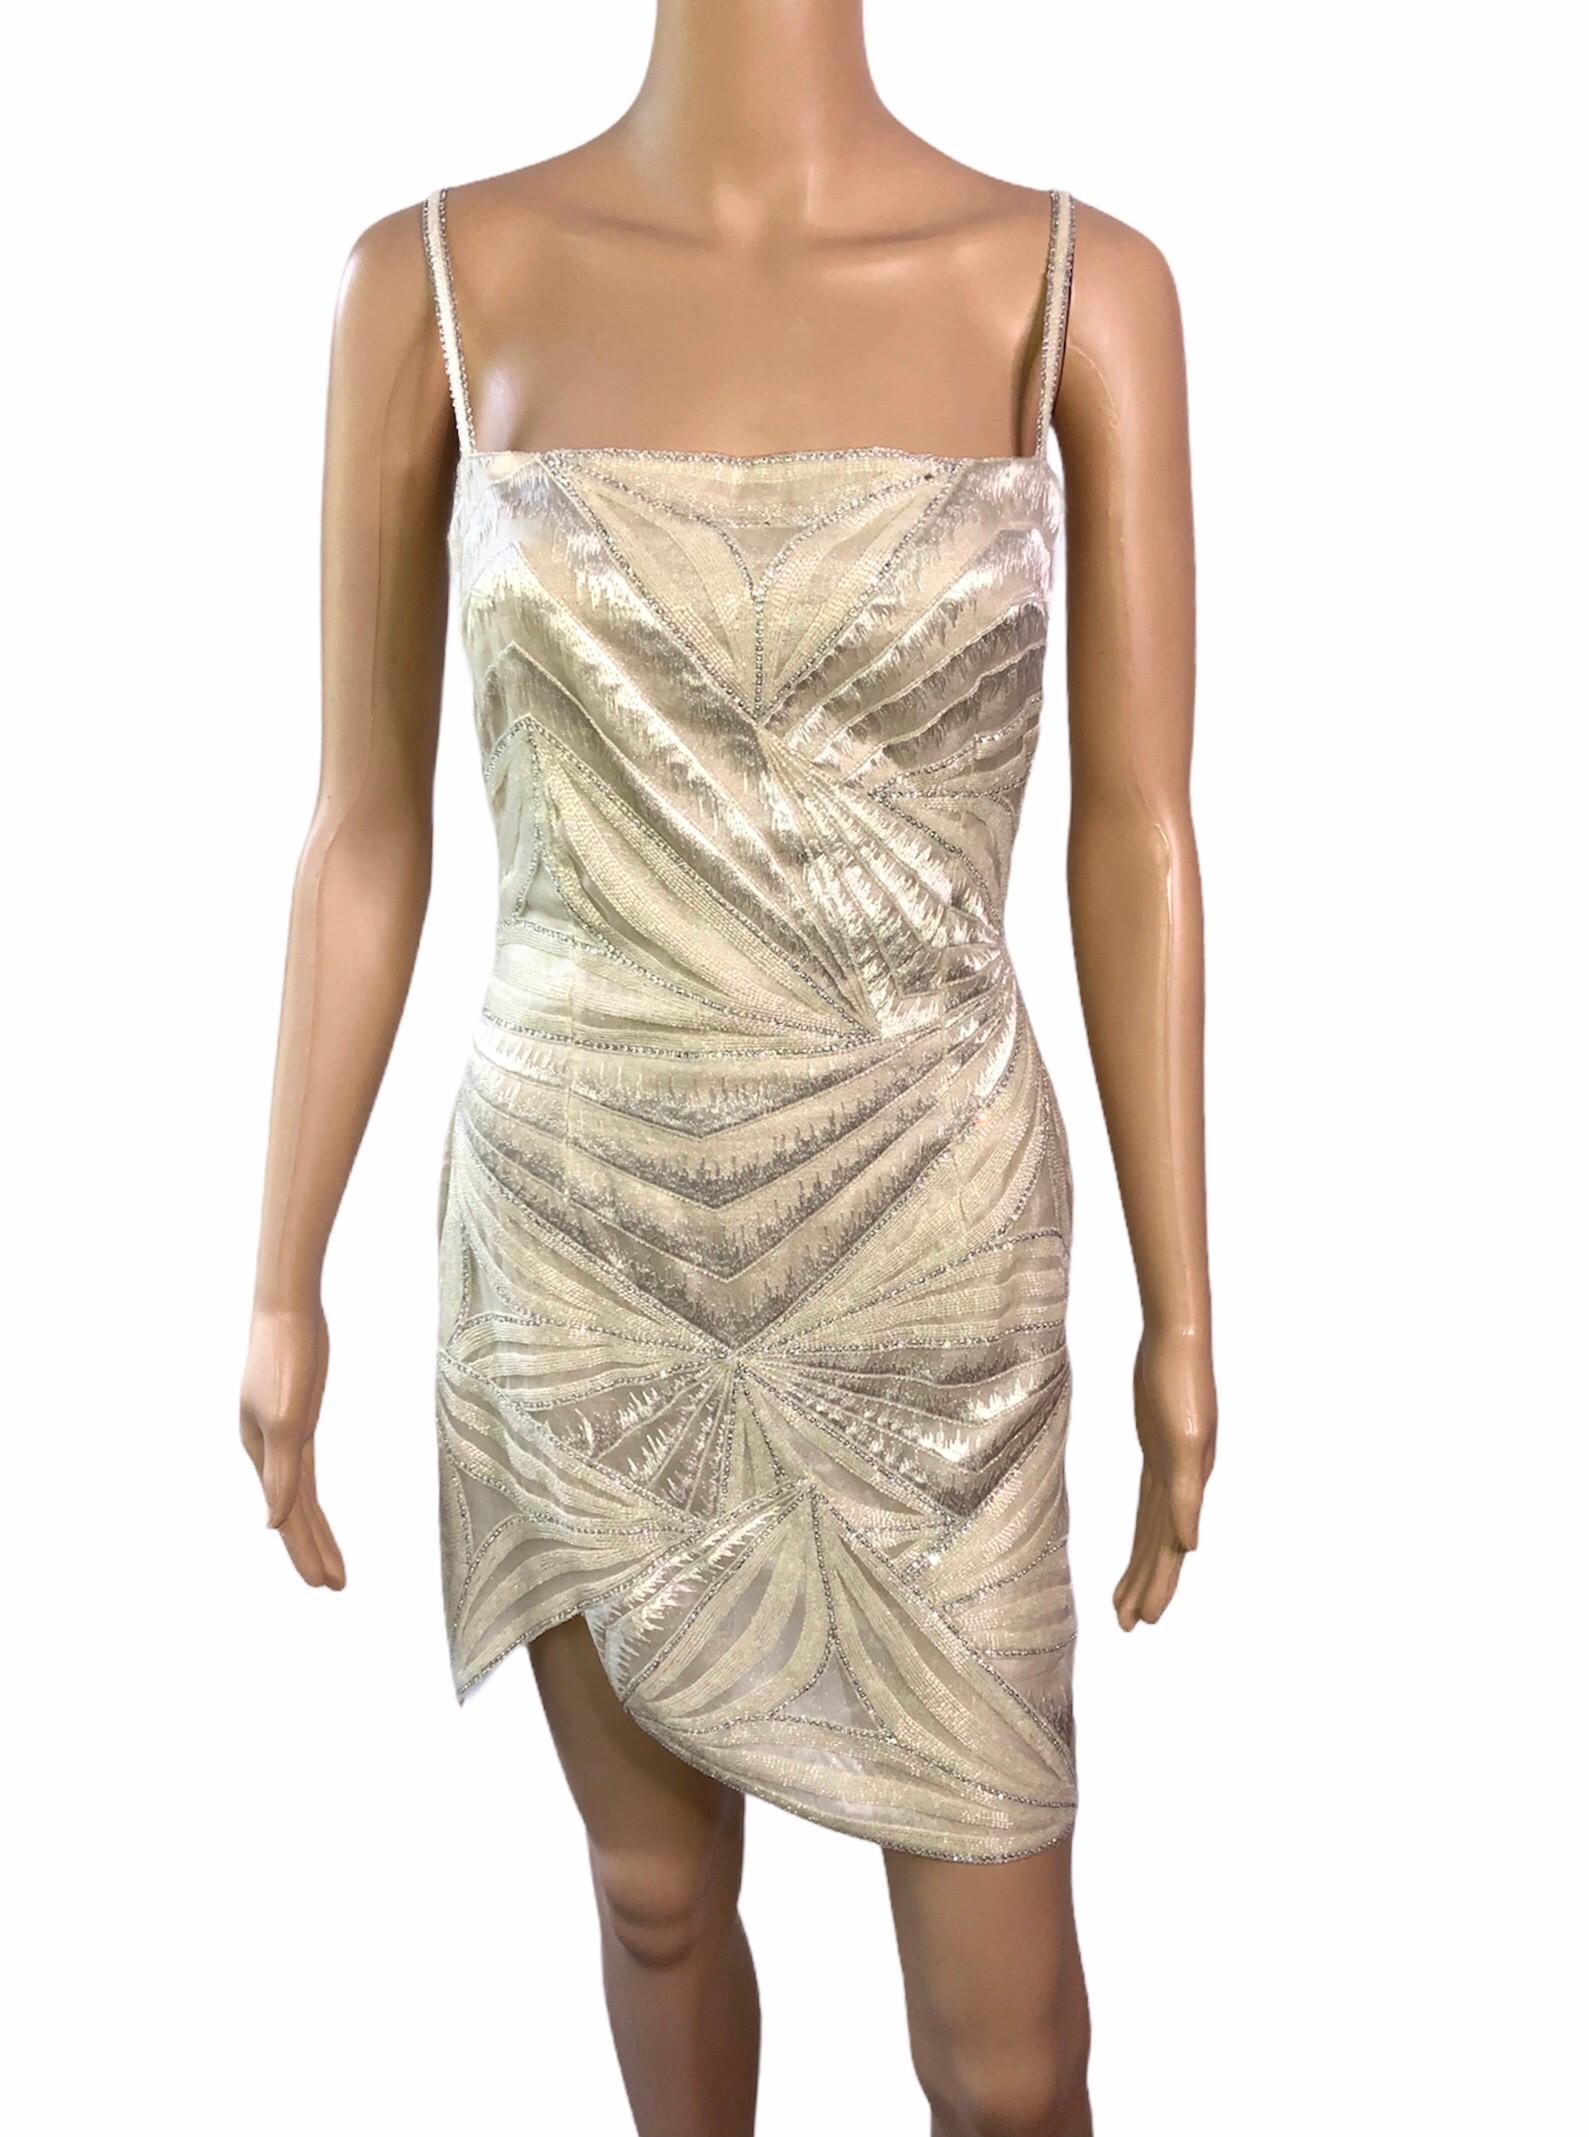 Atelier Versace Haute Couture F/W 1998 Embellished Sheer Cutout Mini Dress In Good Condition For Sale In Naples, FL